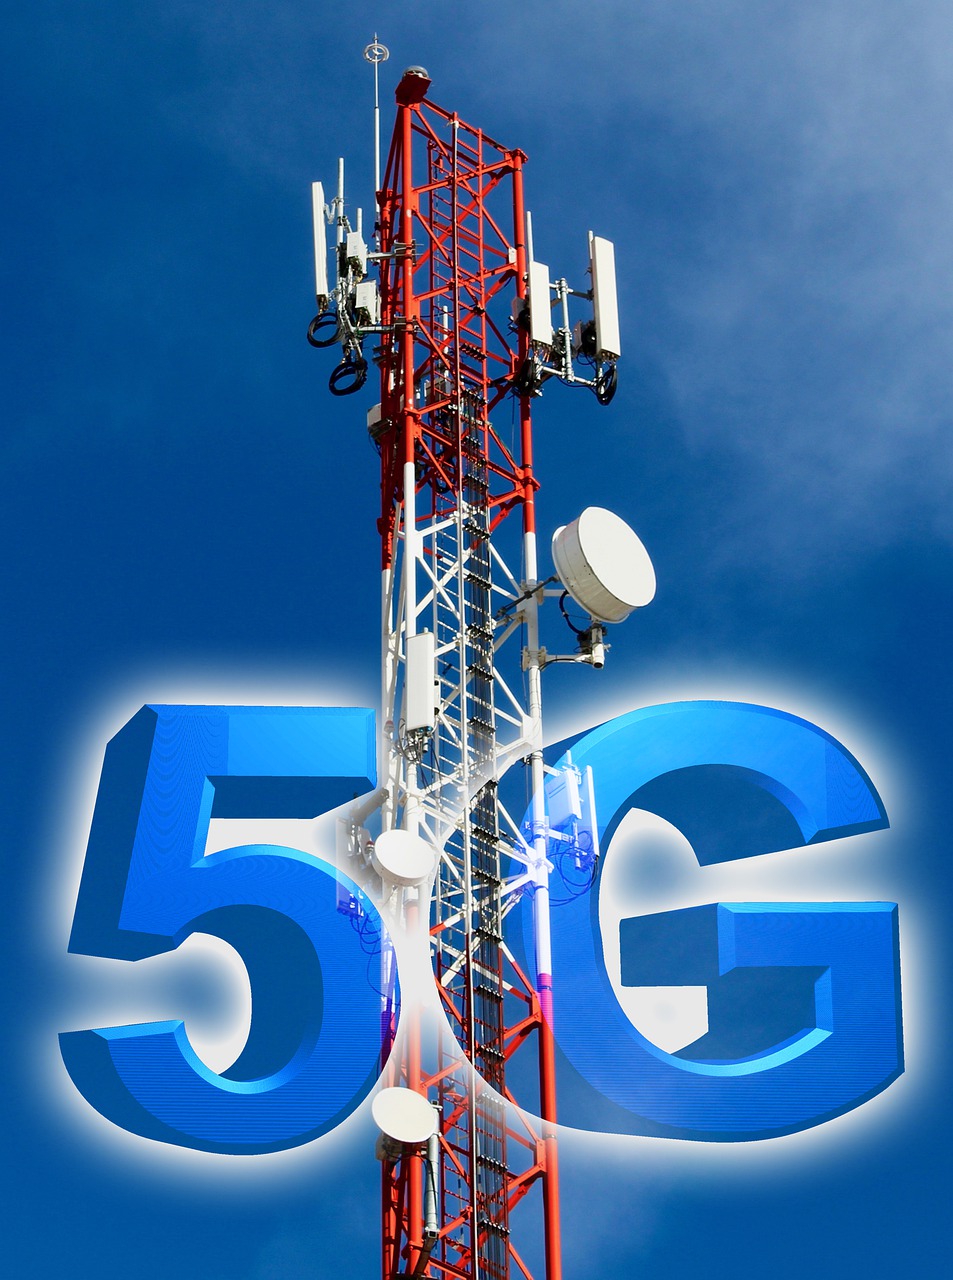 HOW SECURE IS 5G NETWORK